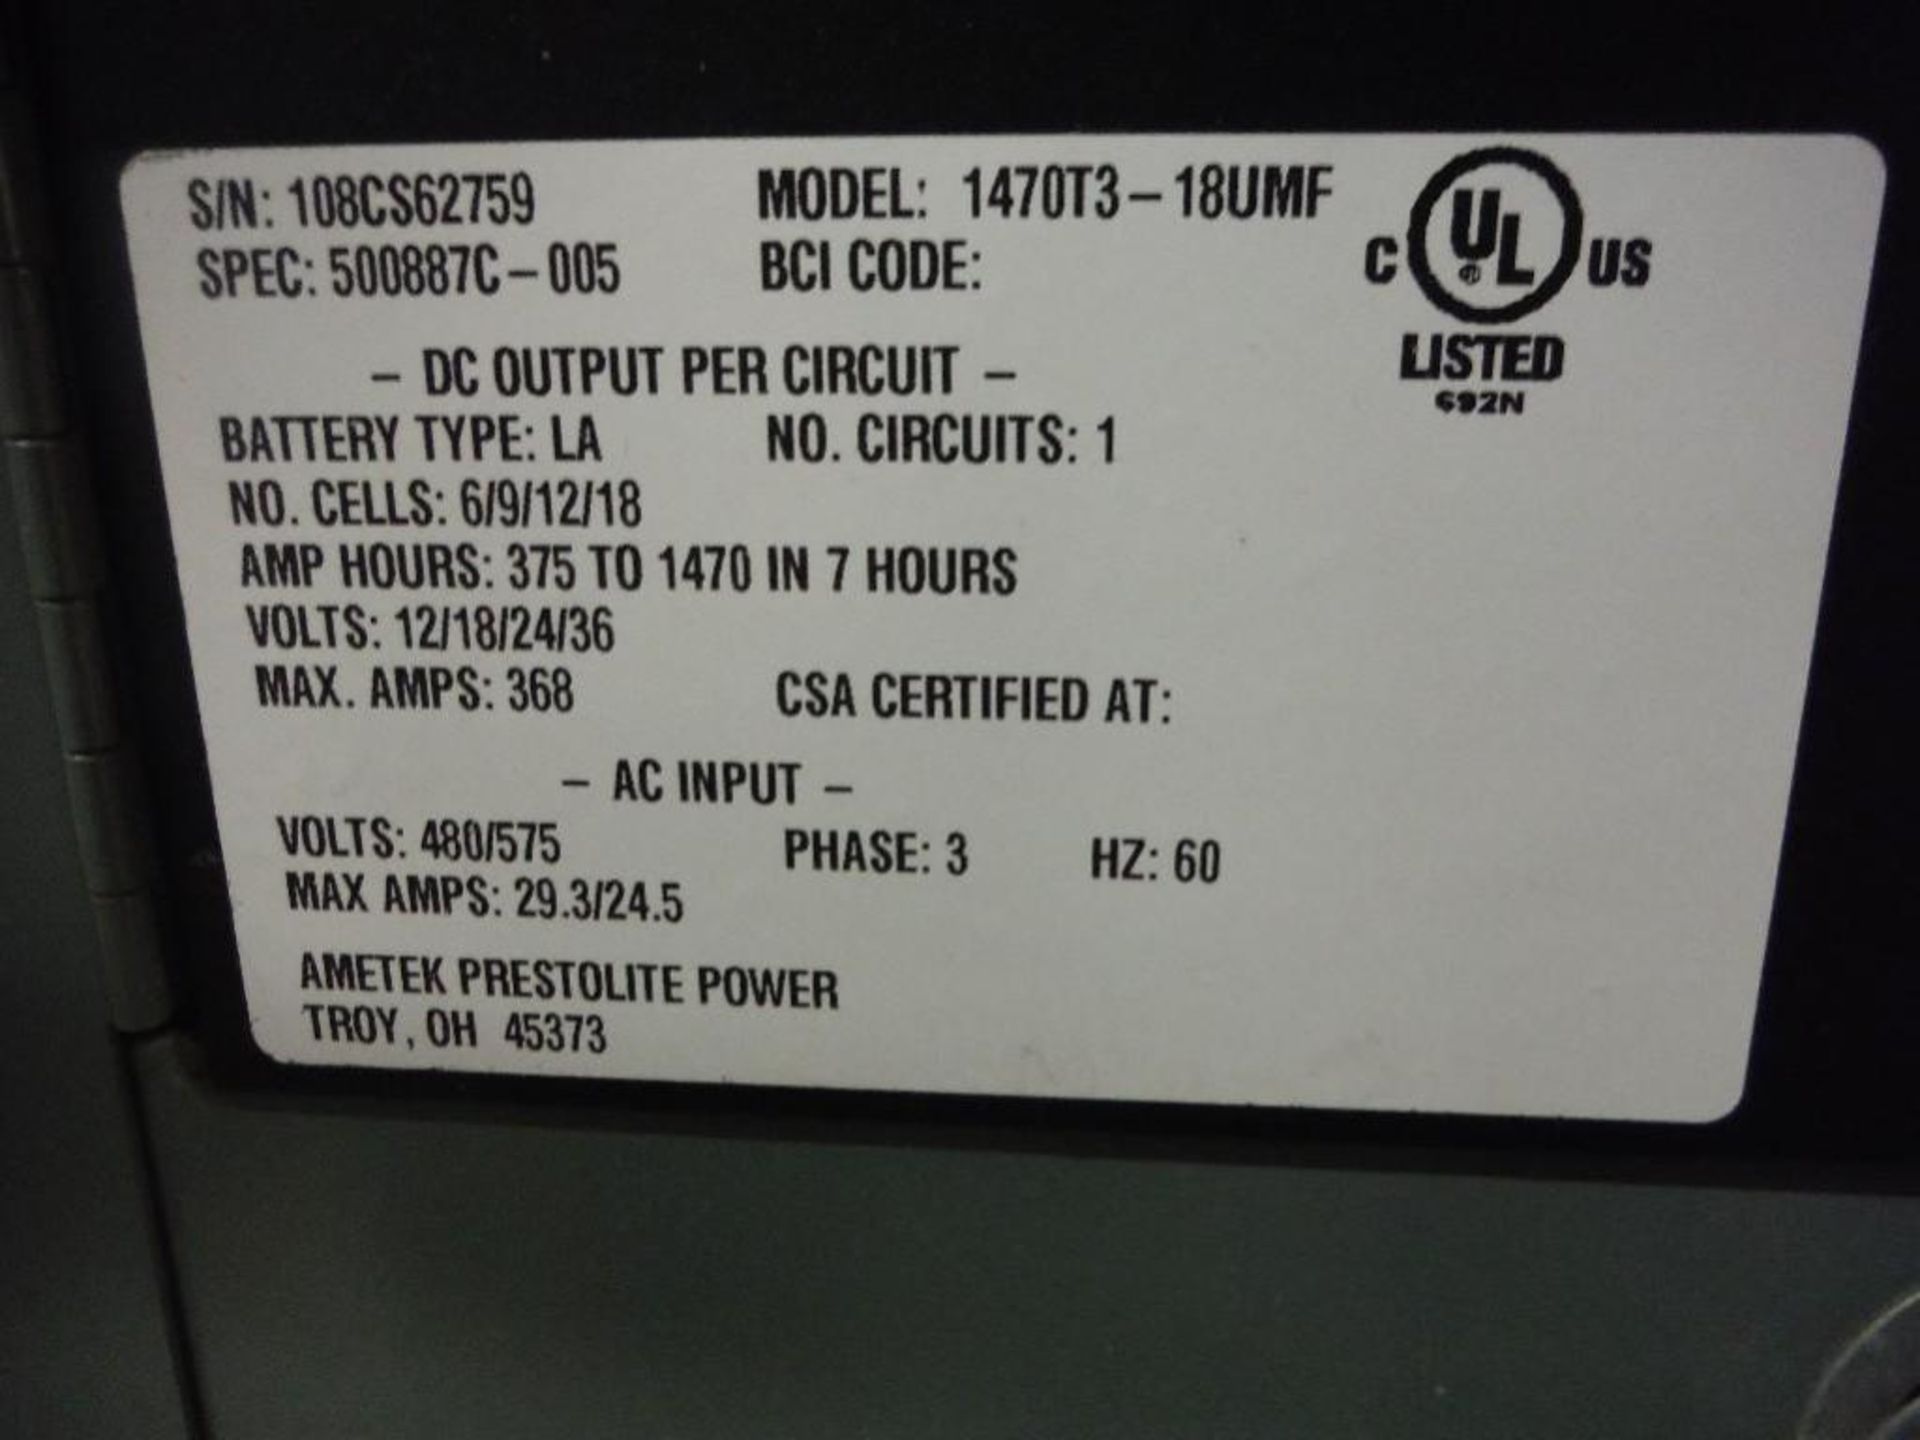 Prestolite power ultra maxx battery charger, 12/18/24/36 volt charger, Model 1470T3-18UMF, SN 108CS6 - Image 3 of 3